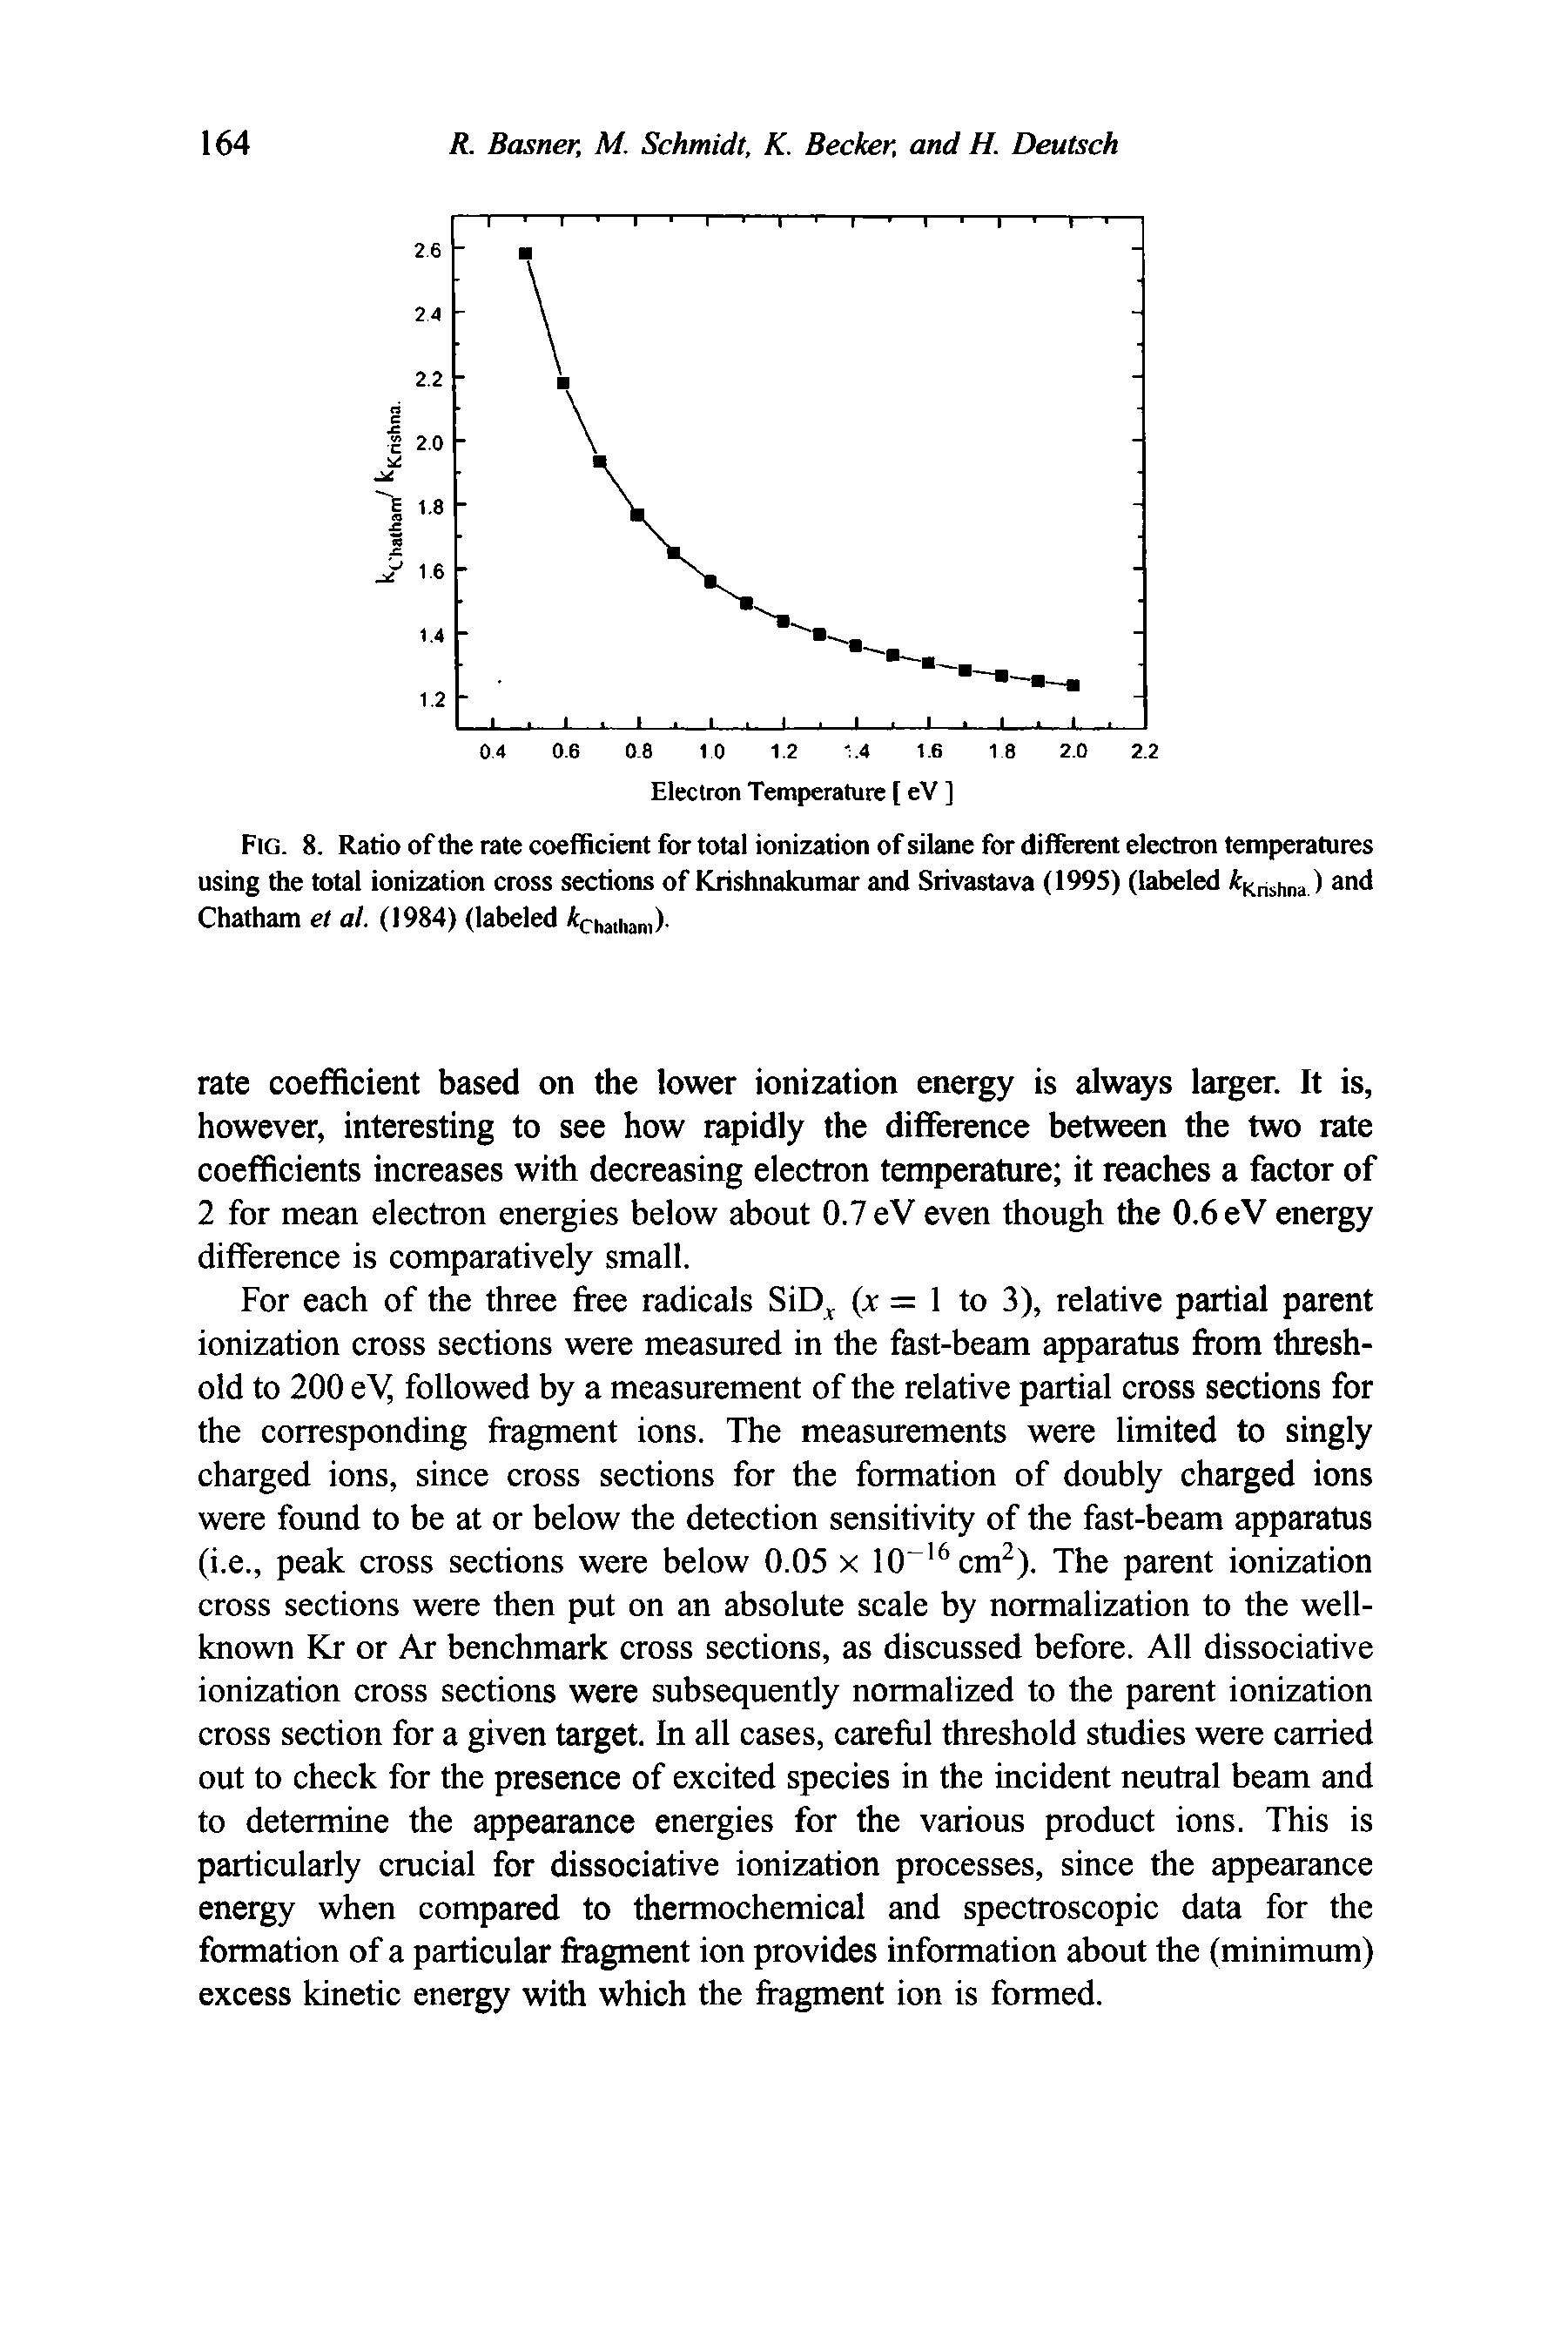 Fig. 8. Ratio of the rate coefficient for total ionization of silane for different electron temperatures using the total ionization cross sections of Krishnakumar and Srivastava (1995) (labeled Krishna 1 nd Chatham el al. (1984) (labeled Chatham)-...